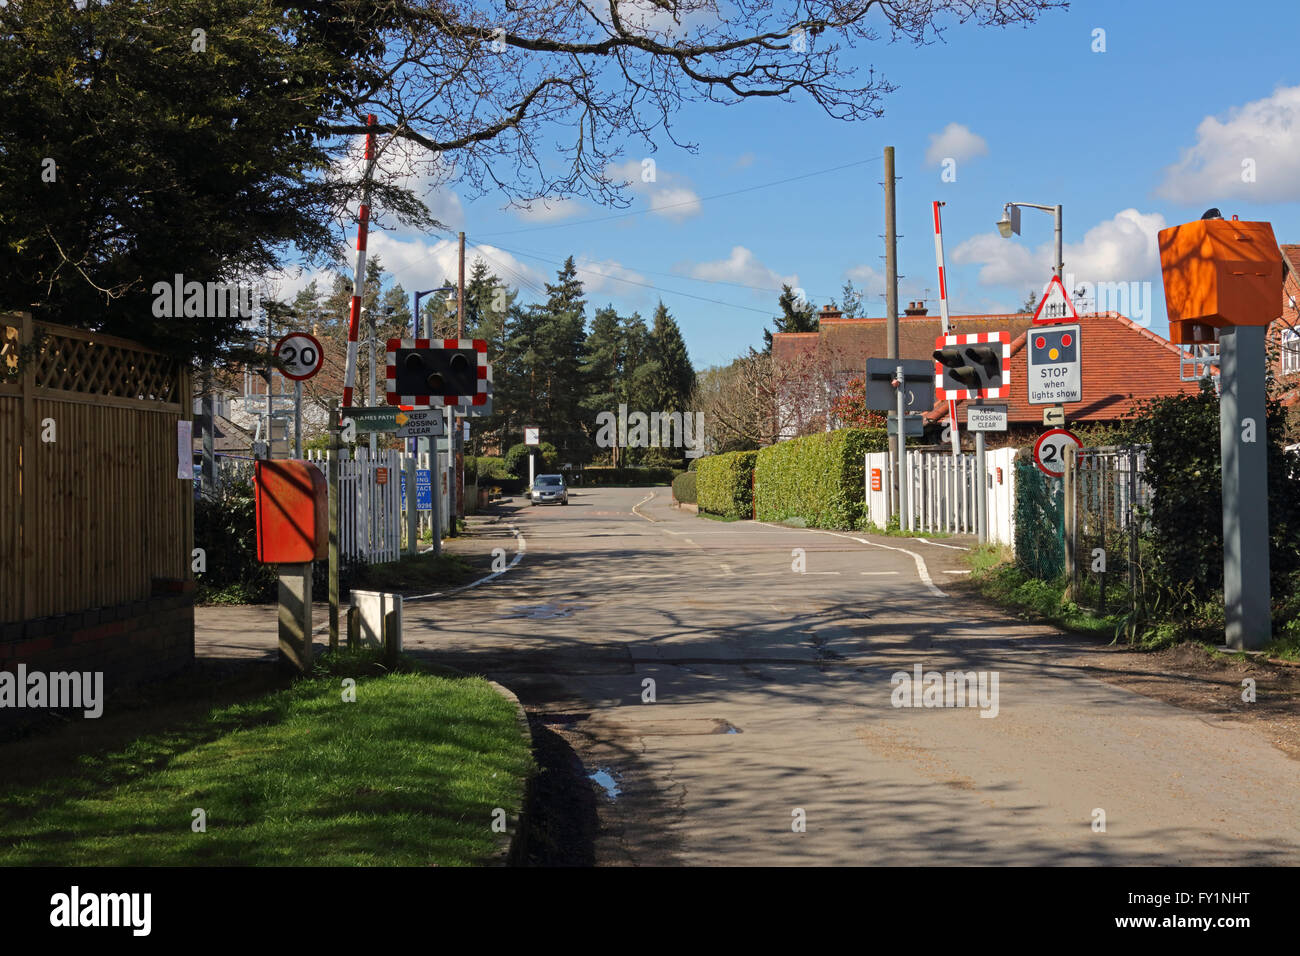 An Automatic Half Barrier Level Crossing In A Rural Location With Stock Photo Alamy